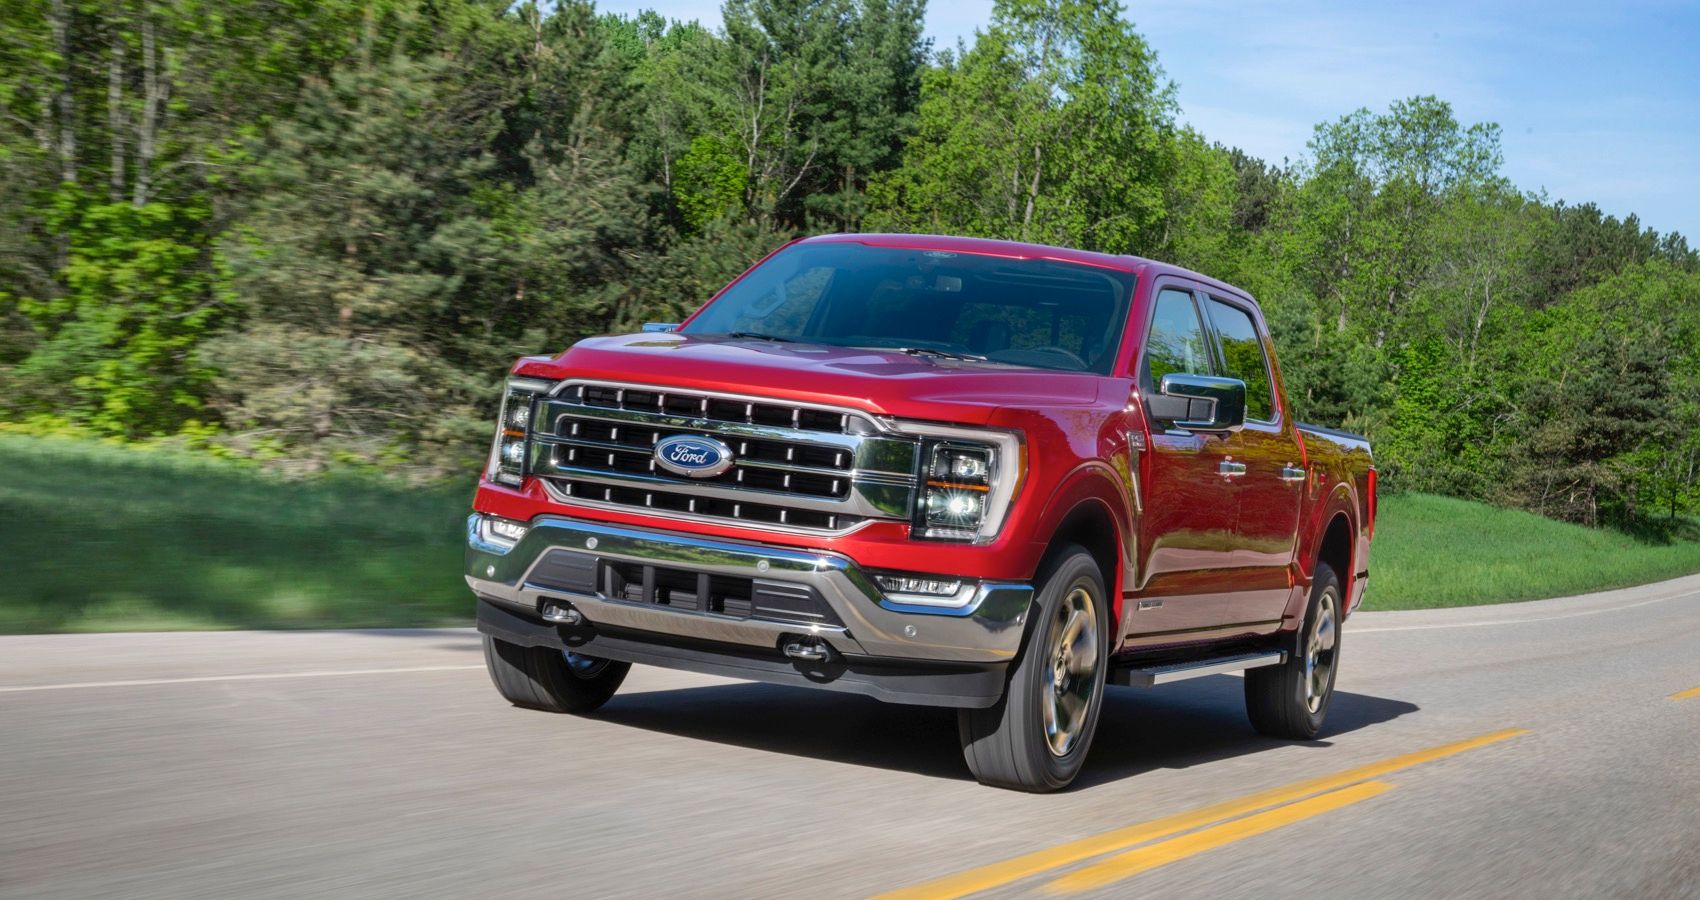 2020 Ford F-150 Lariat in Red